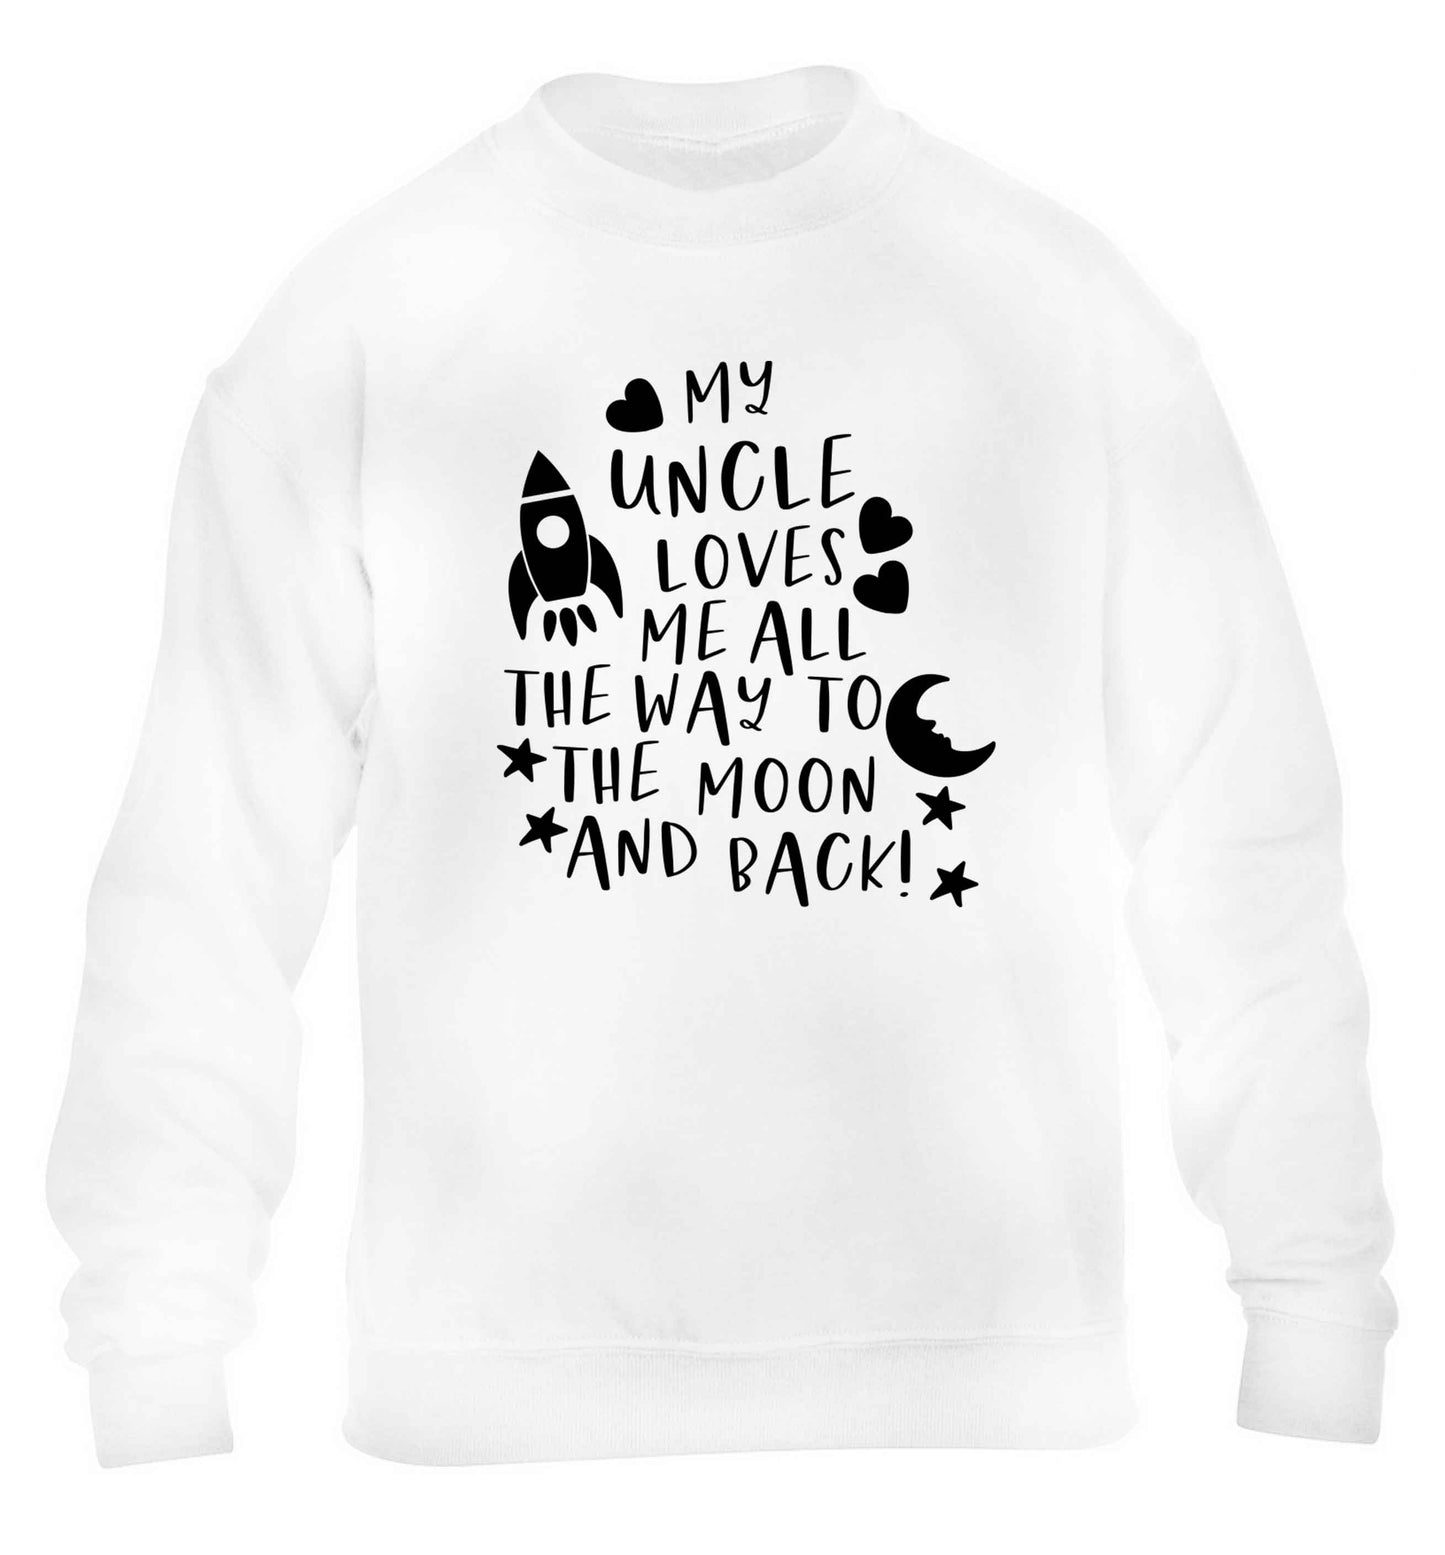 My uncle loves me all the way to the moon and back children's white sweater 12-13 Years